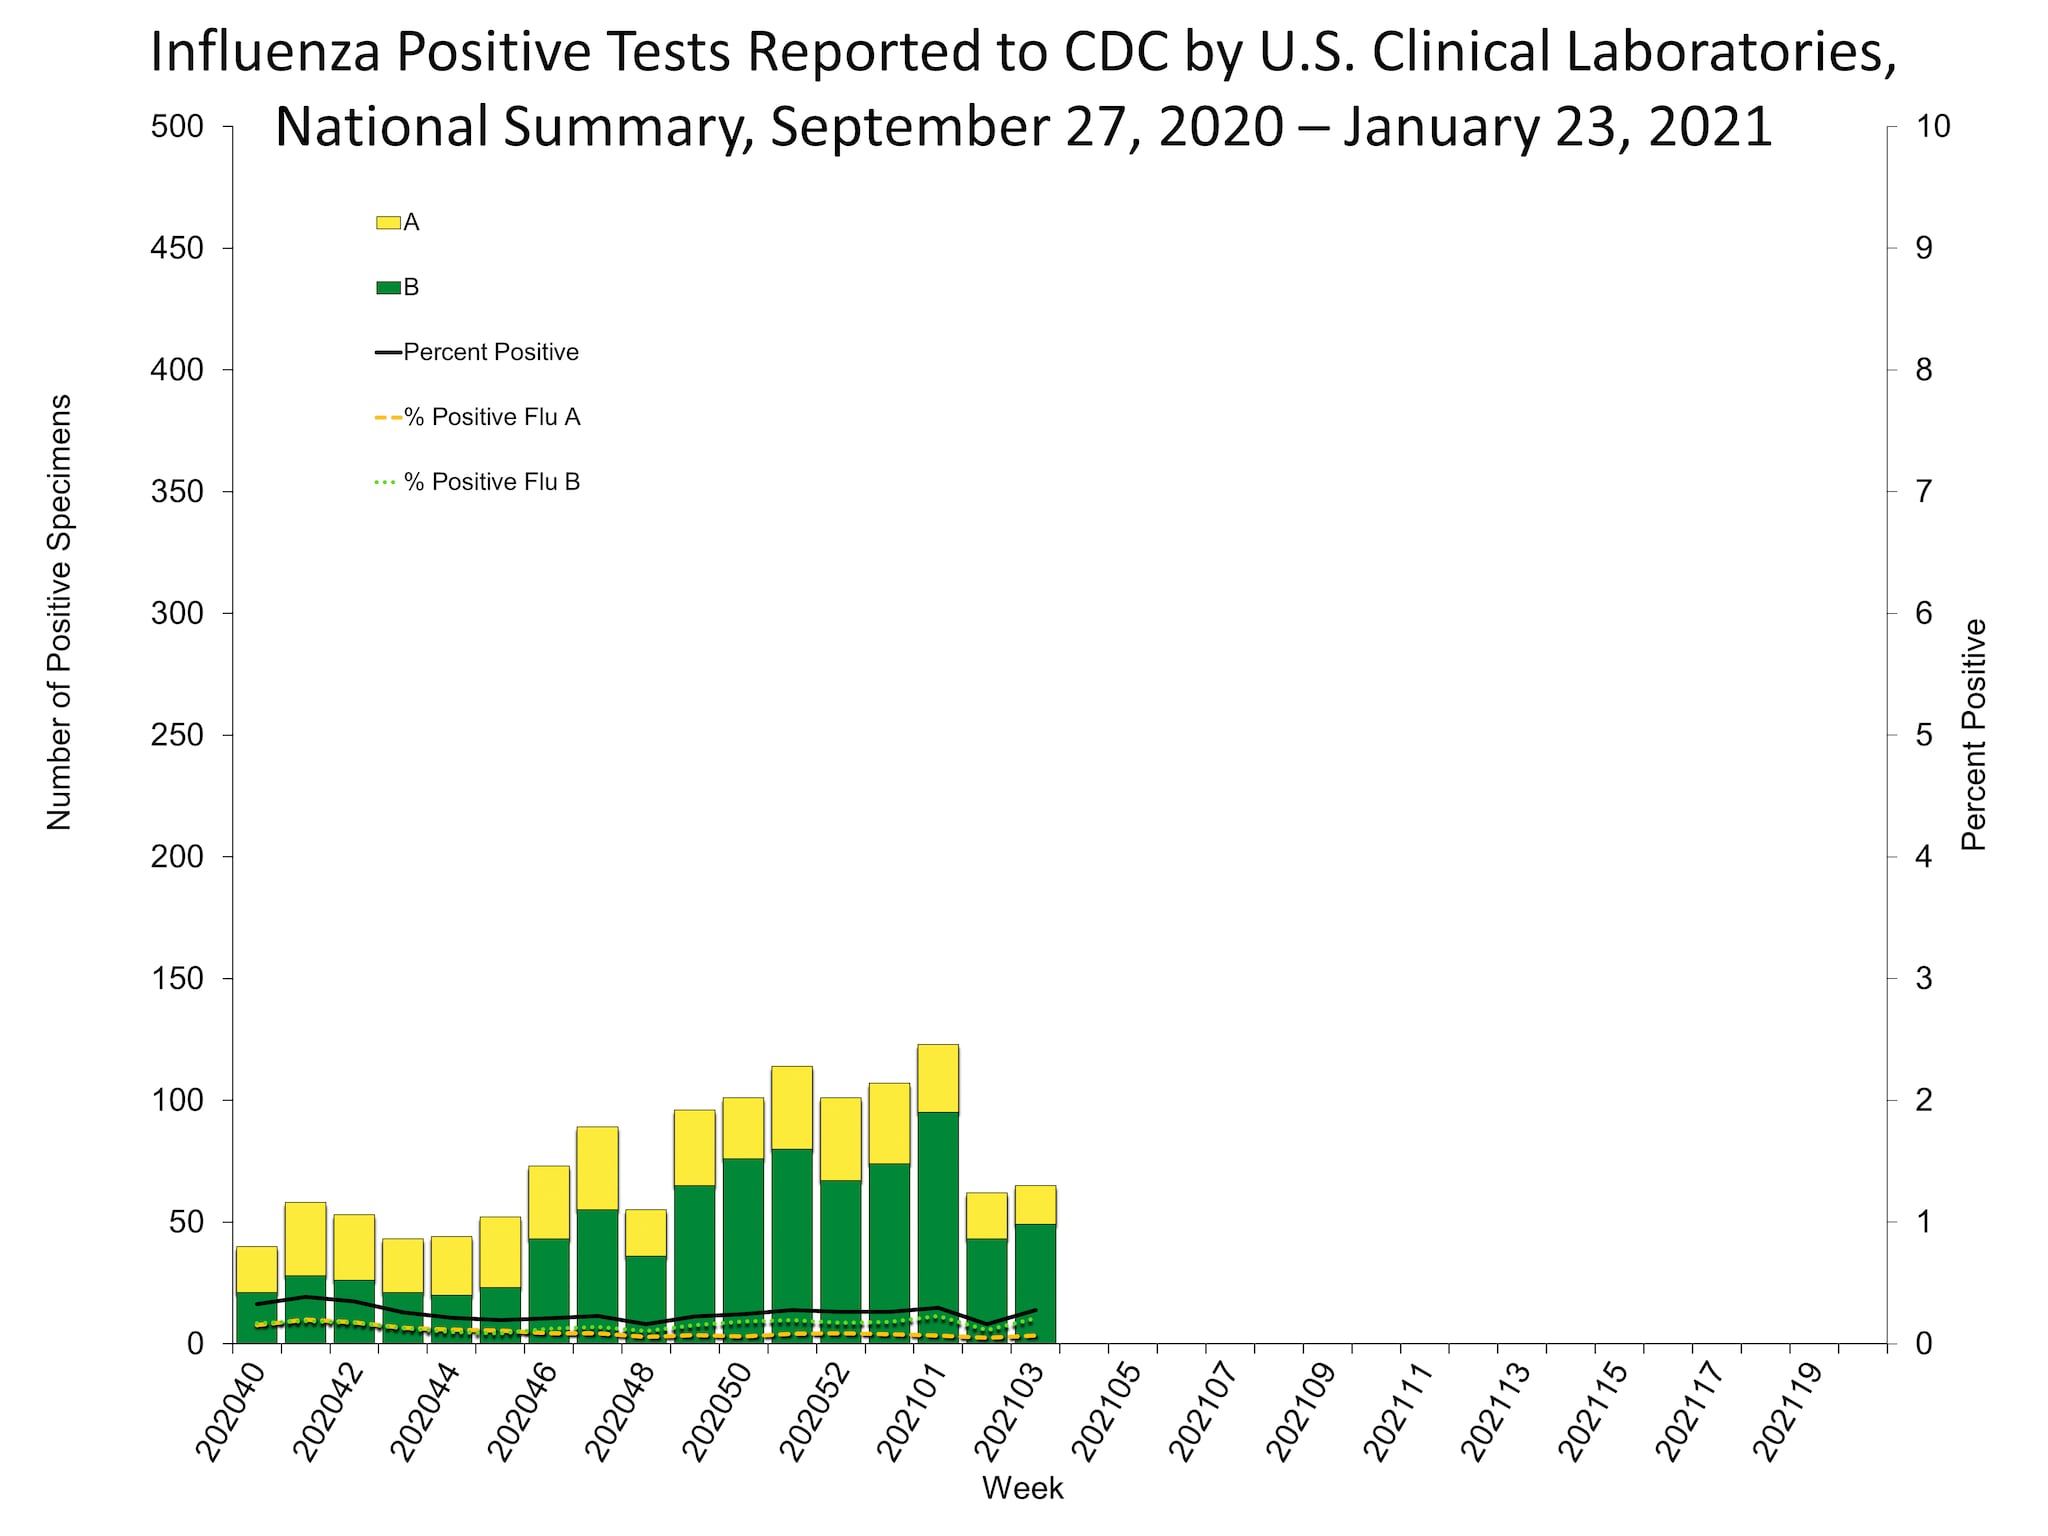 Influenza Positive Tests Reported to CDC by US Clinical Laboratories